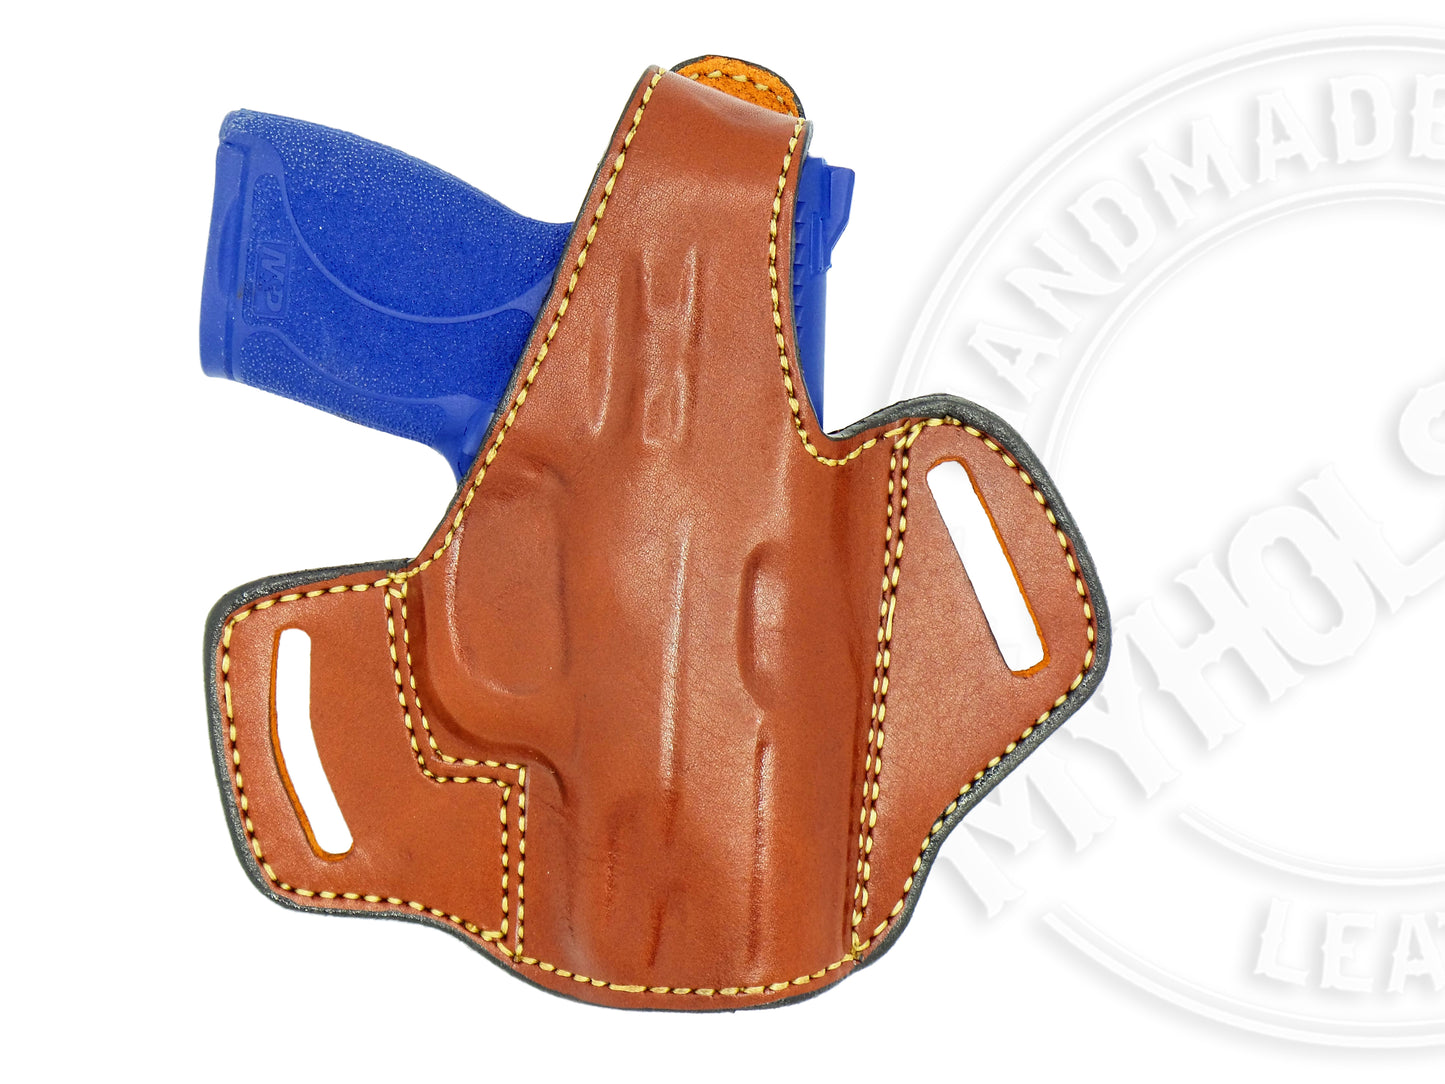 Astra A-75 45acp Compact OWB Thumb Break Leather Belt Holster